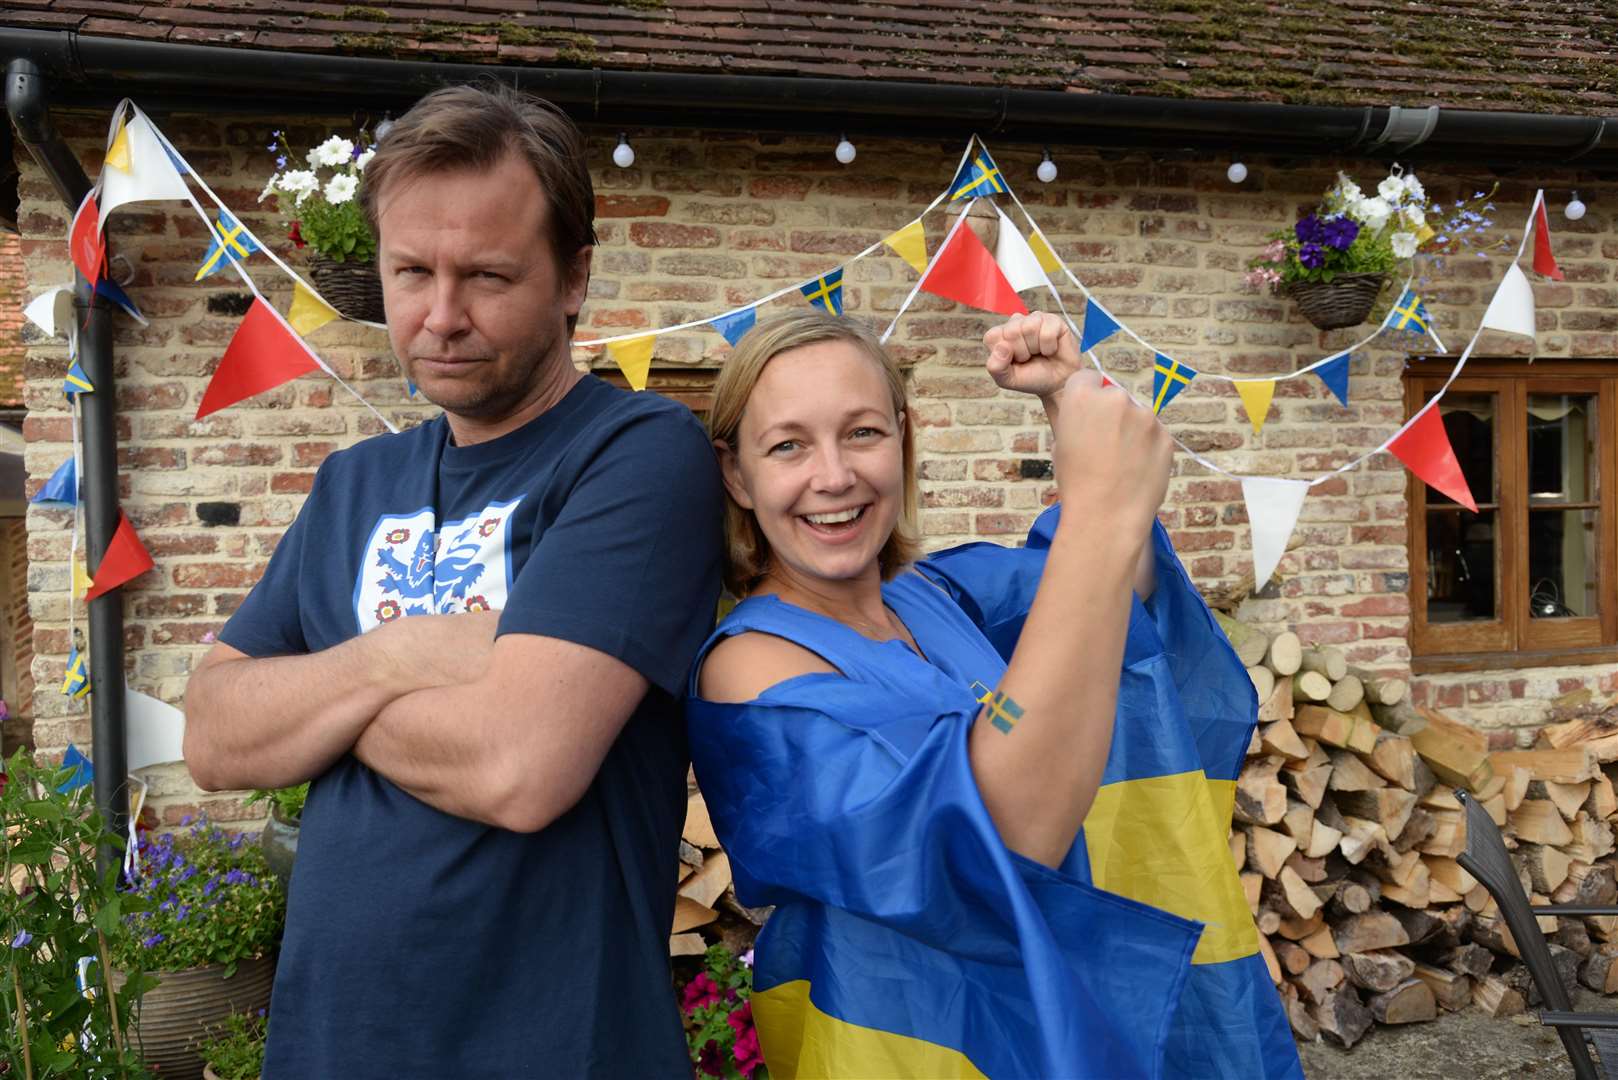 Divided loyalties over the World Cup, Mike Abbott and his Swedish partner Anna Svensson at the Yew Tree pub, Westbere. Picture: Chris Davey